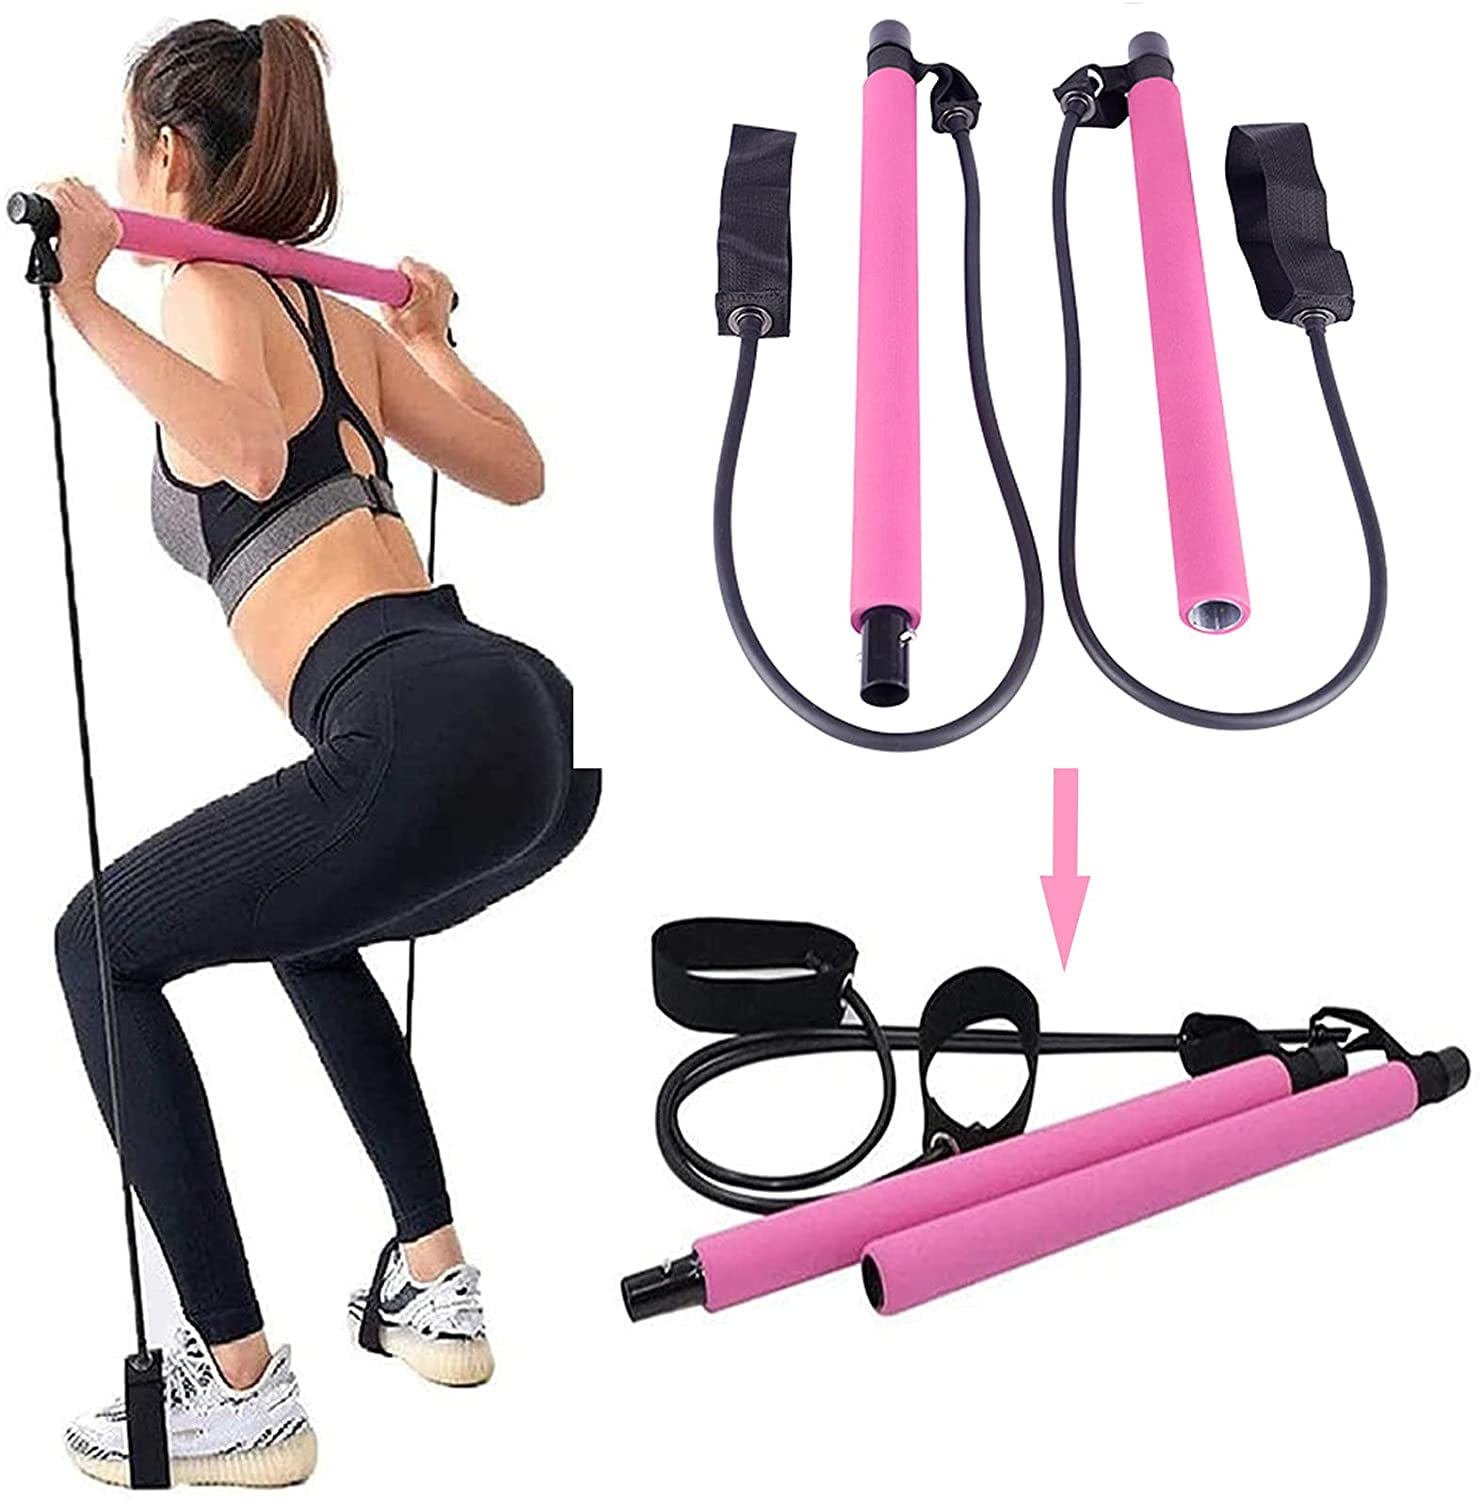 Conditioning & Toning Home Gym Fitness Yoga Pilates Bar Kit with Resistance Bands Portable Workout Equipment Hip Bands & Jump Rope for Full Body Sculpting Pilates 